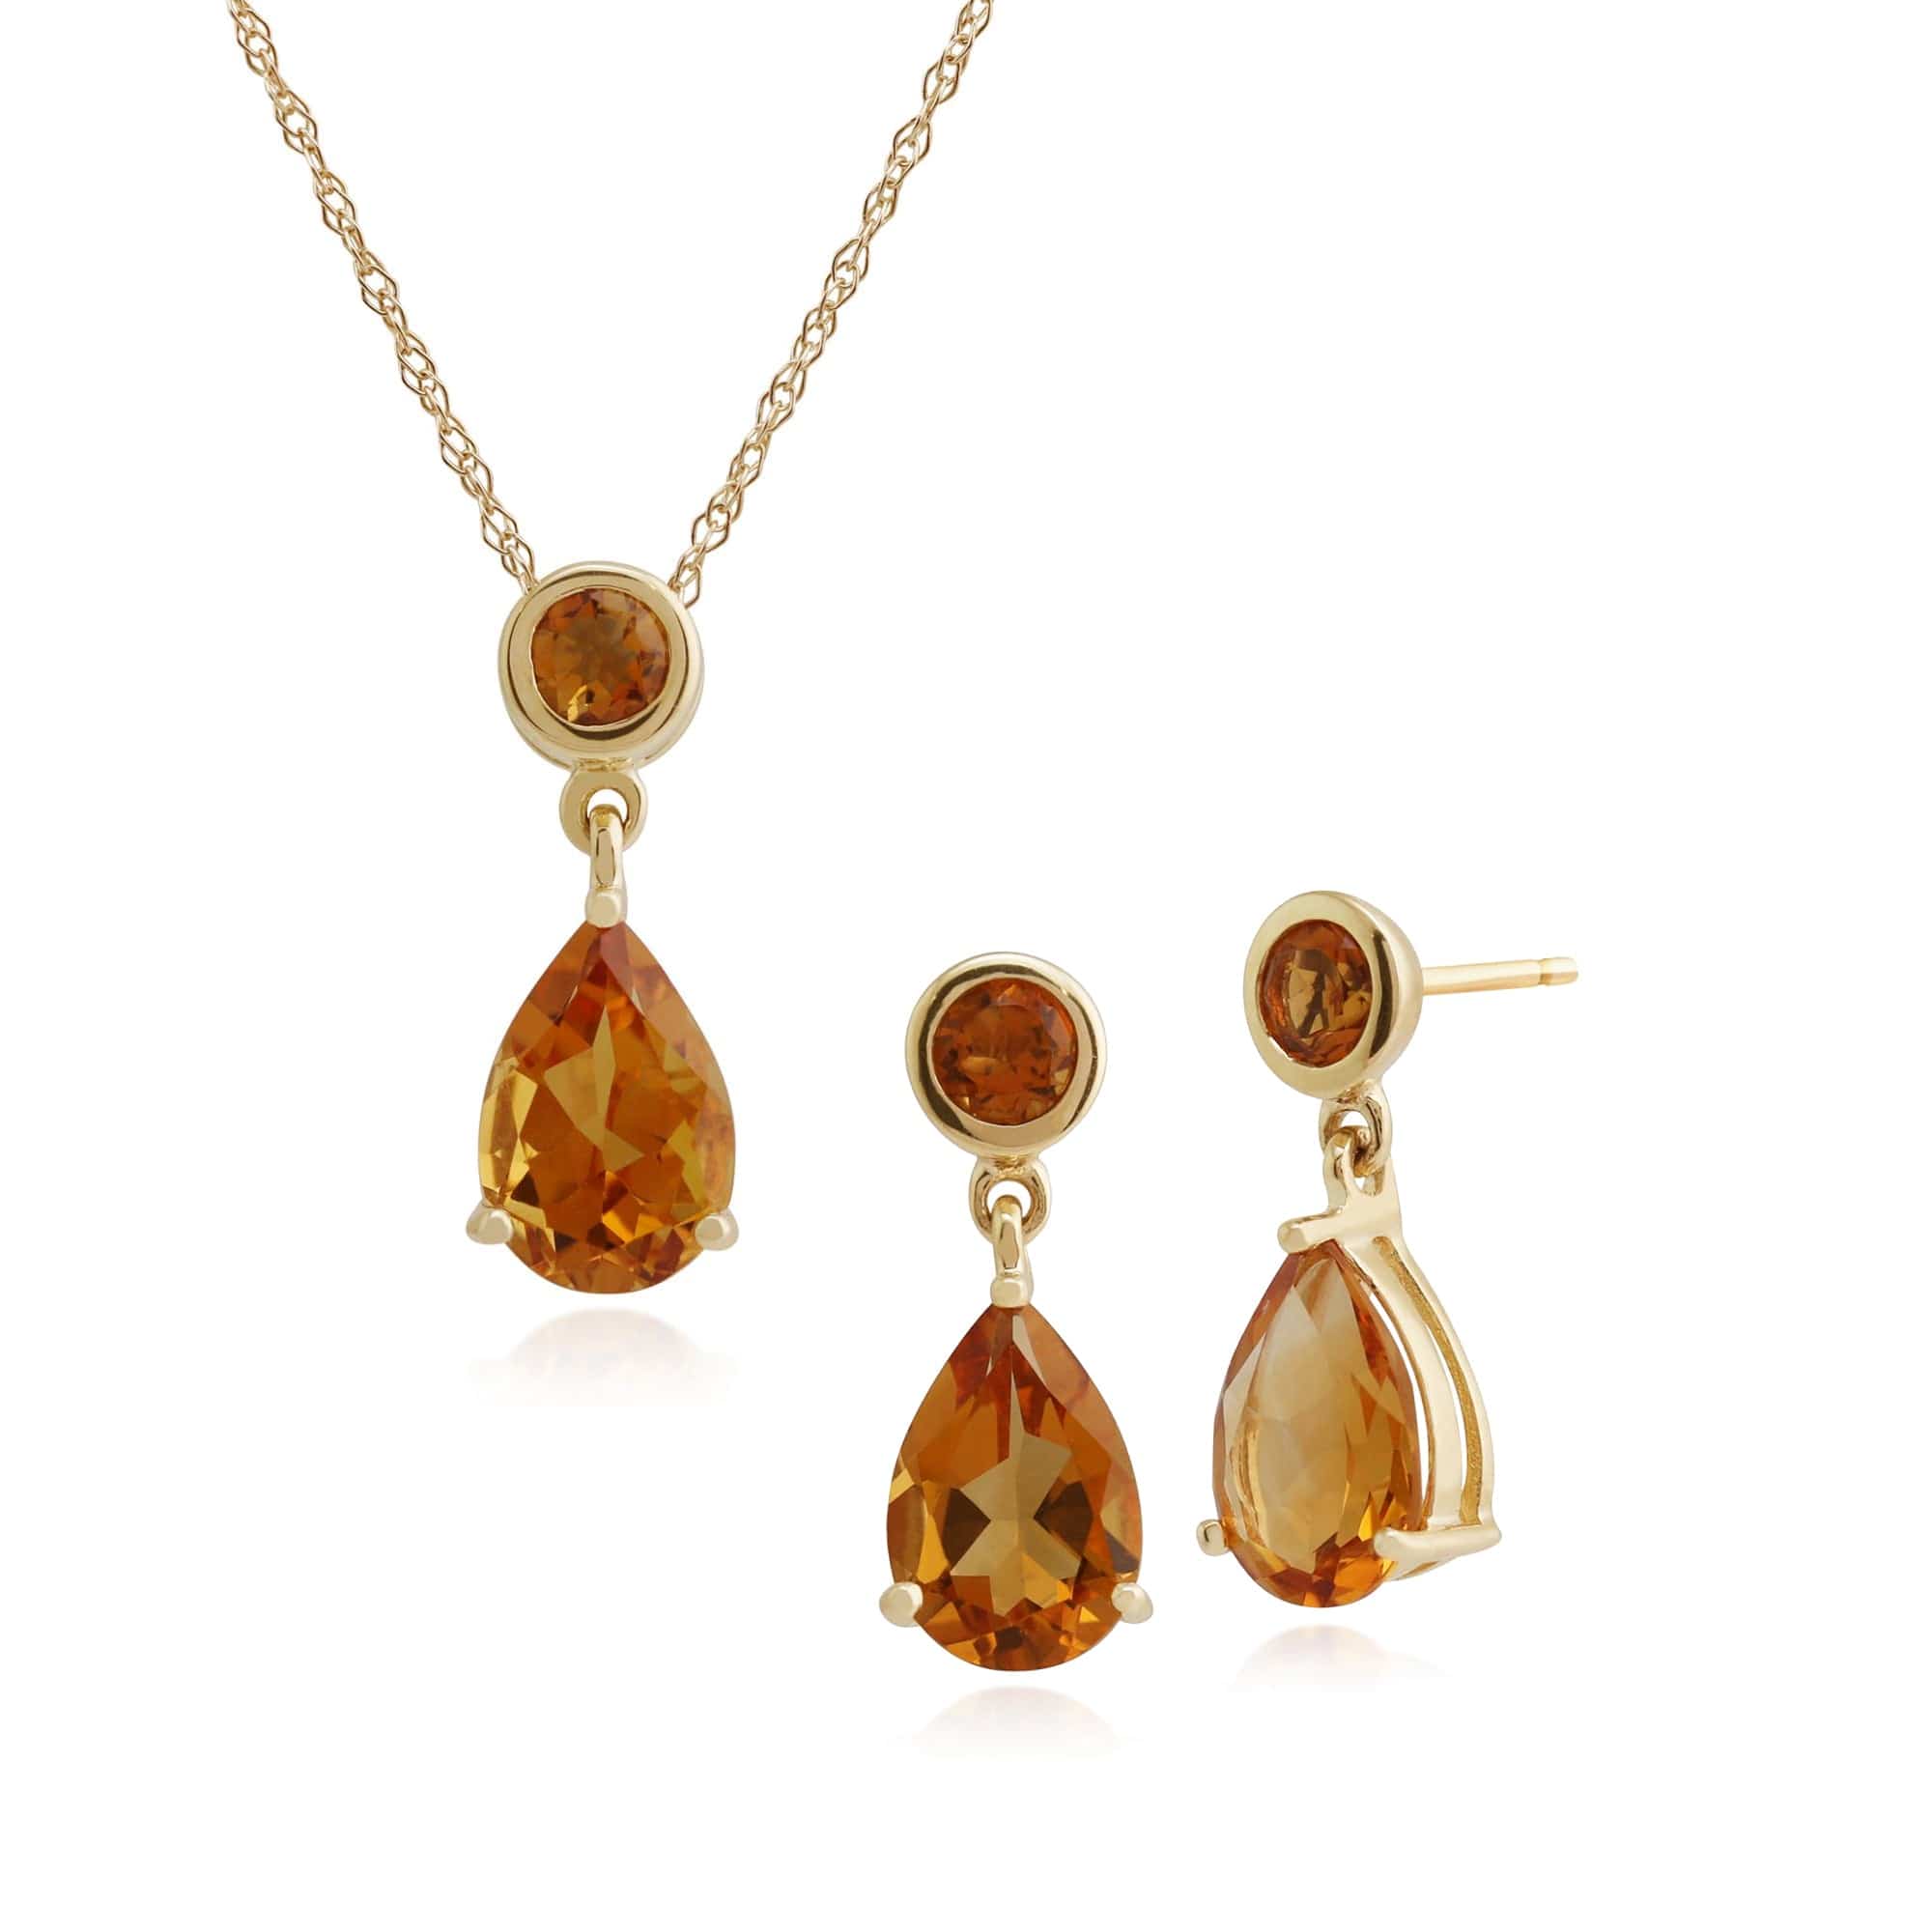 186E0148069-186P0188069 Classic Pear & Round Citrine Drop Earrings & Pendant Set in 9ct Yellow Gold 1